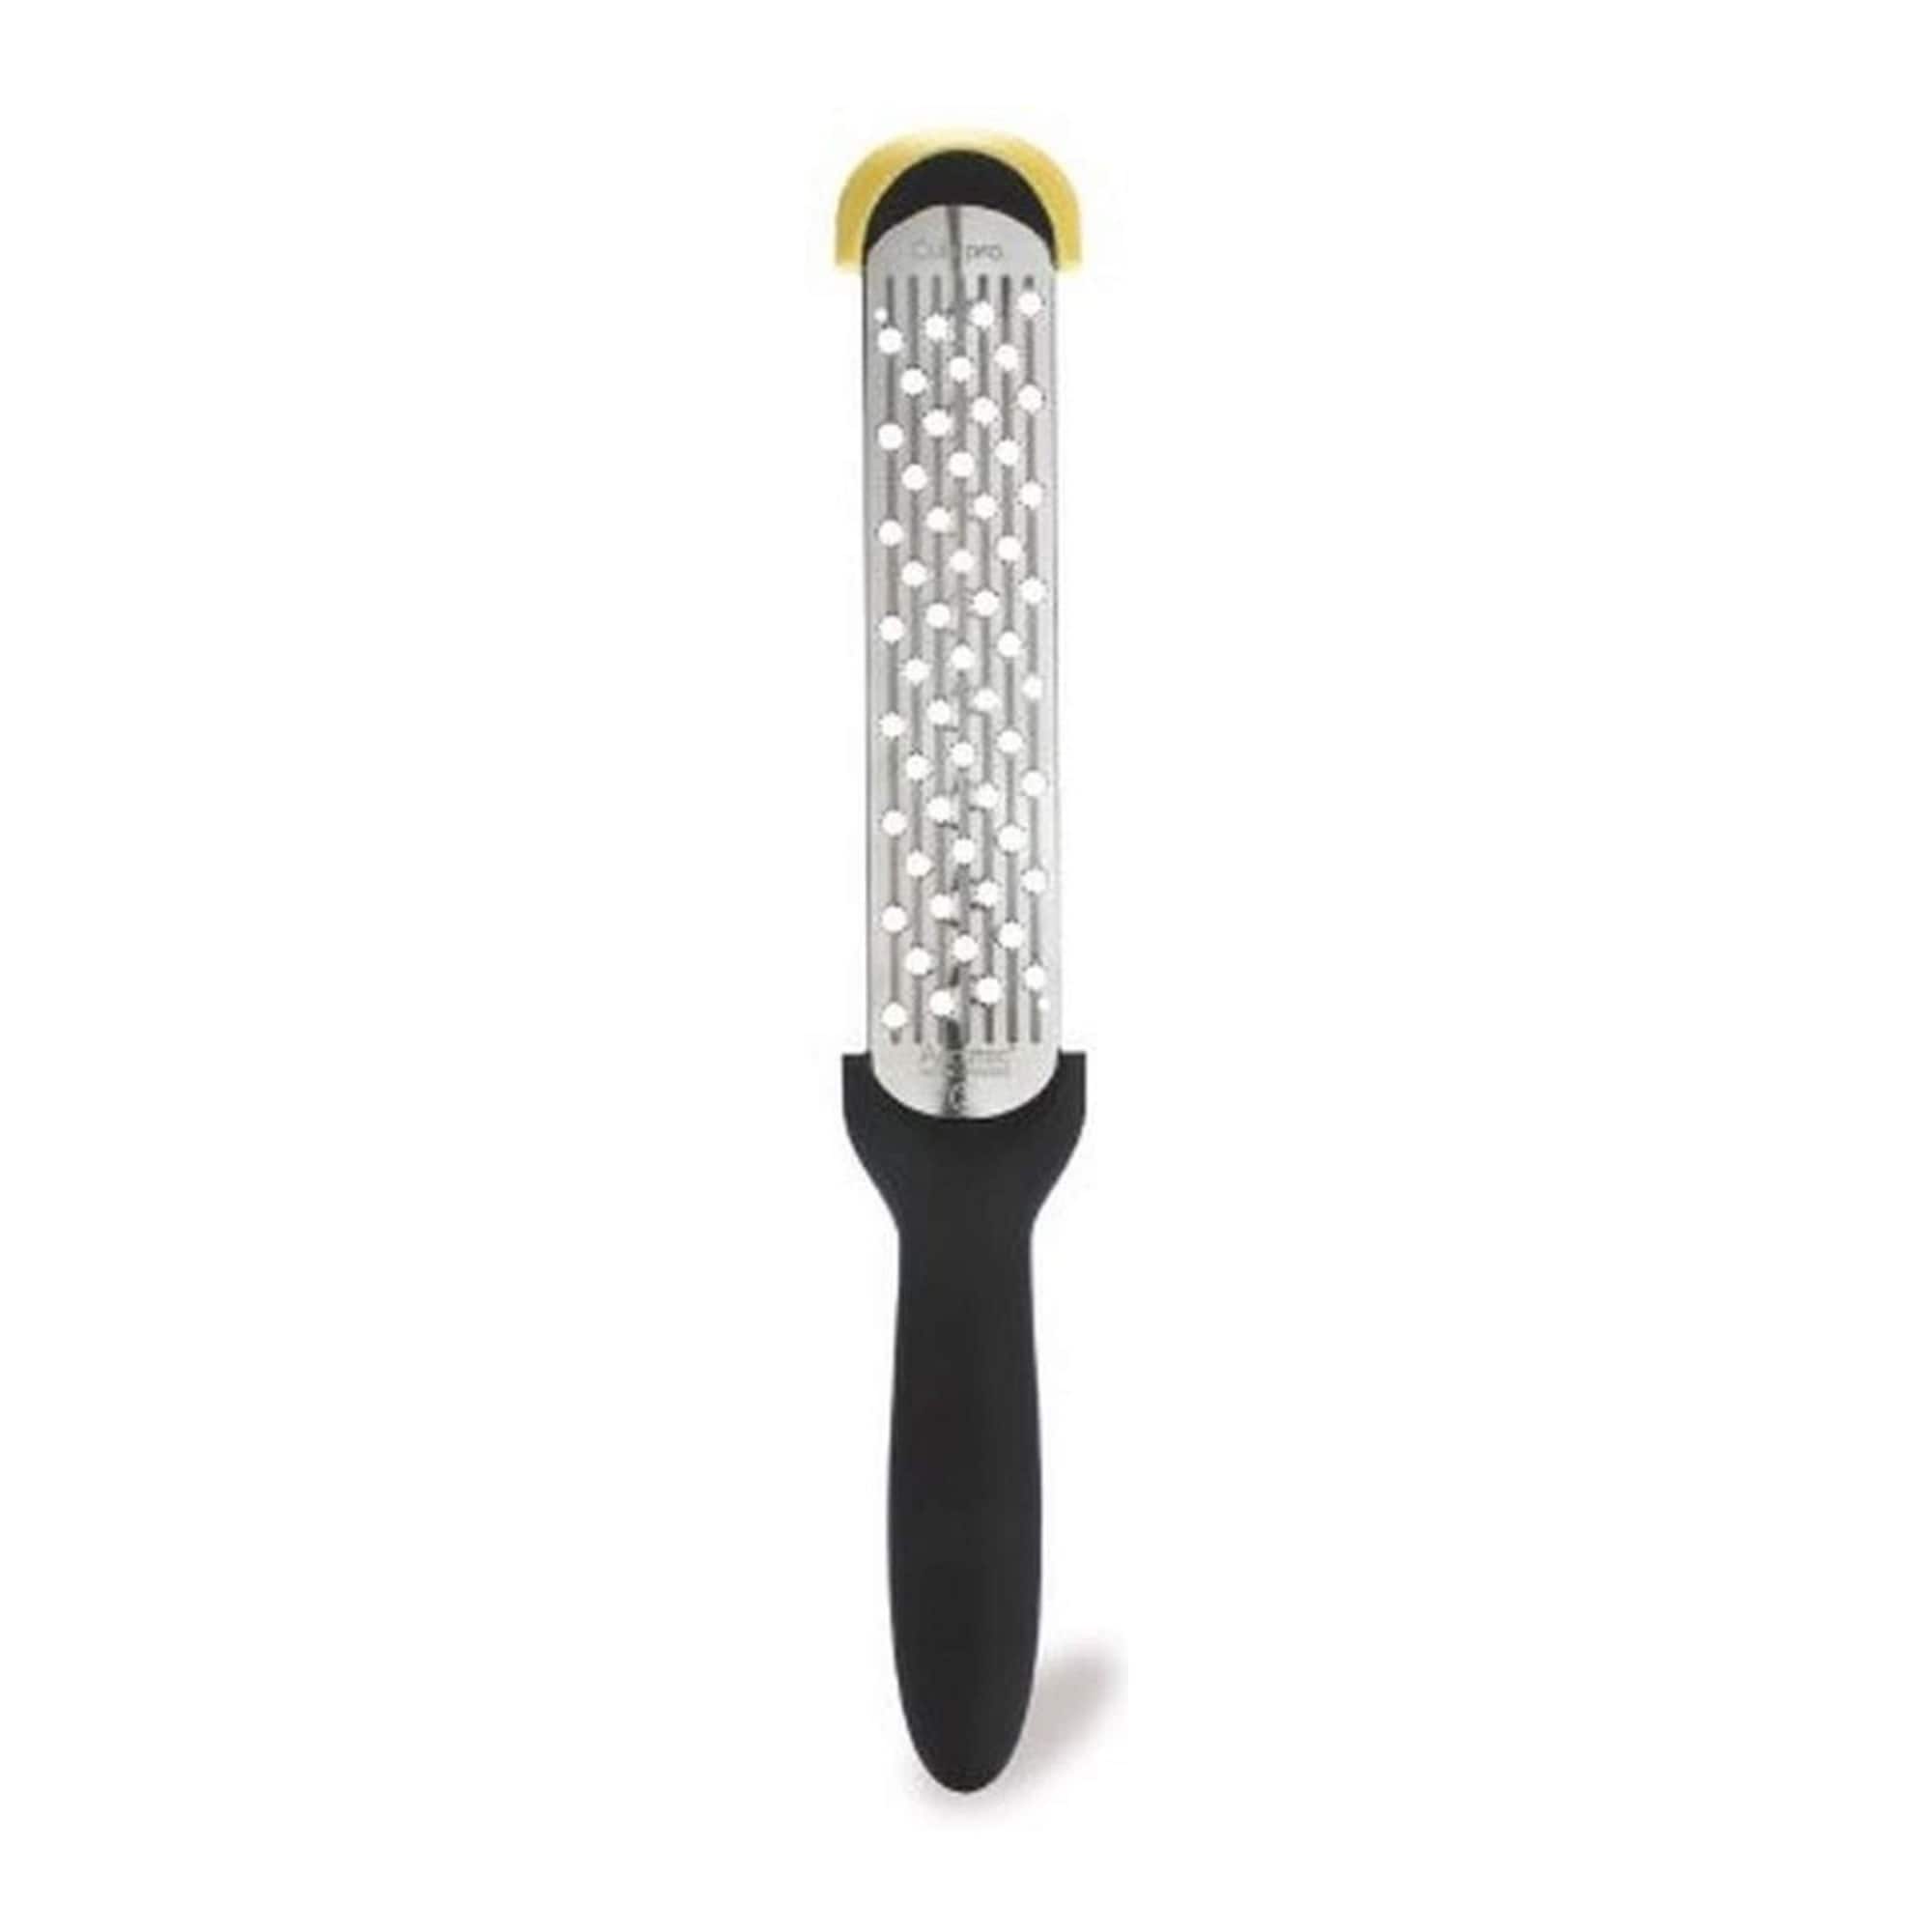  Zyliss All Cheese Acid Etched Rotary Grater with Fine